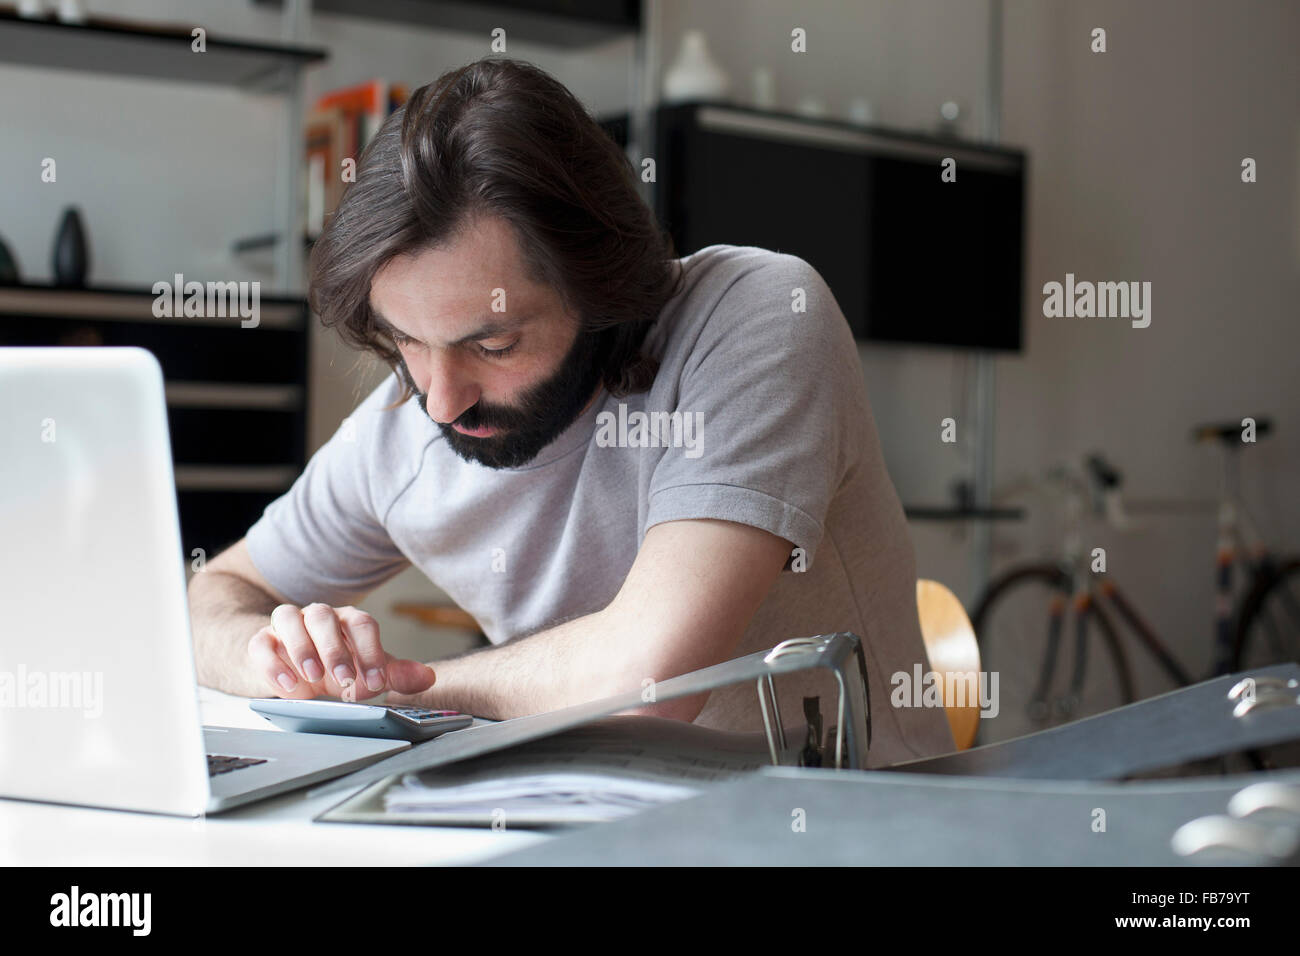 Mid adult man using calculator at table Stock Photo